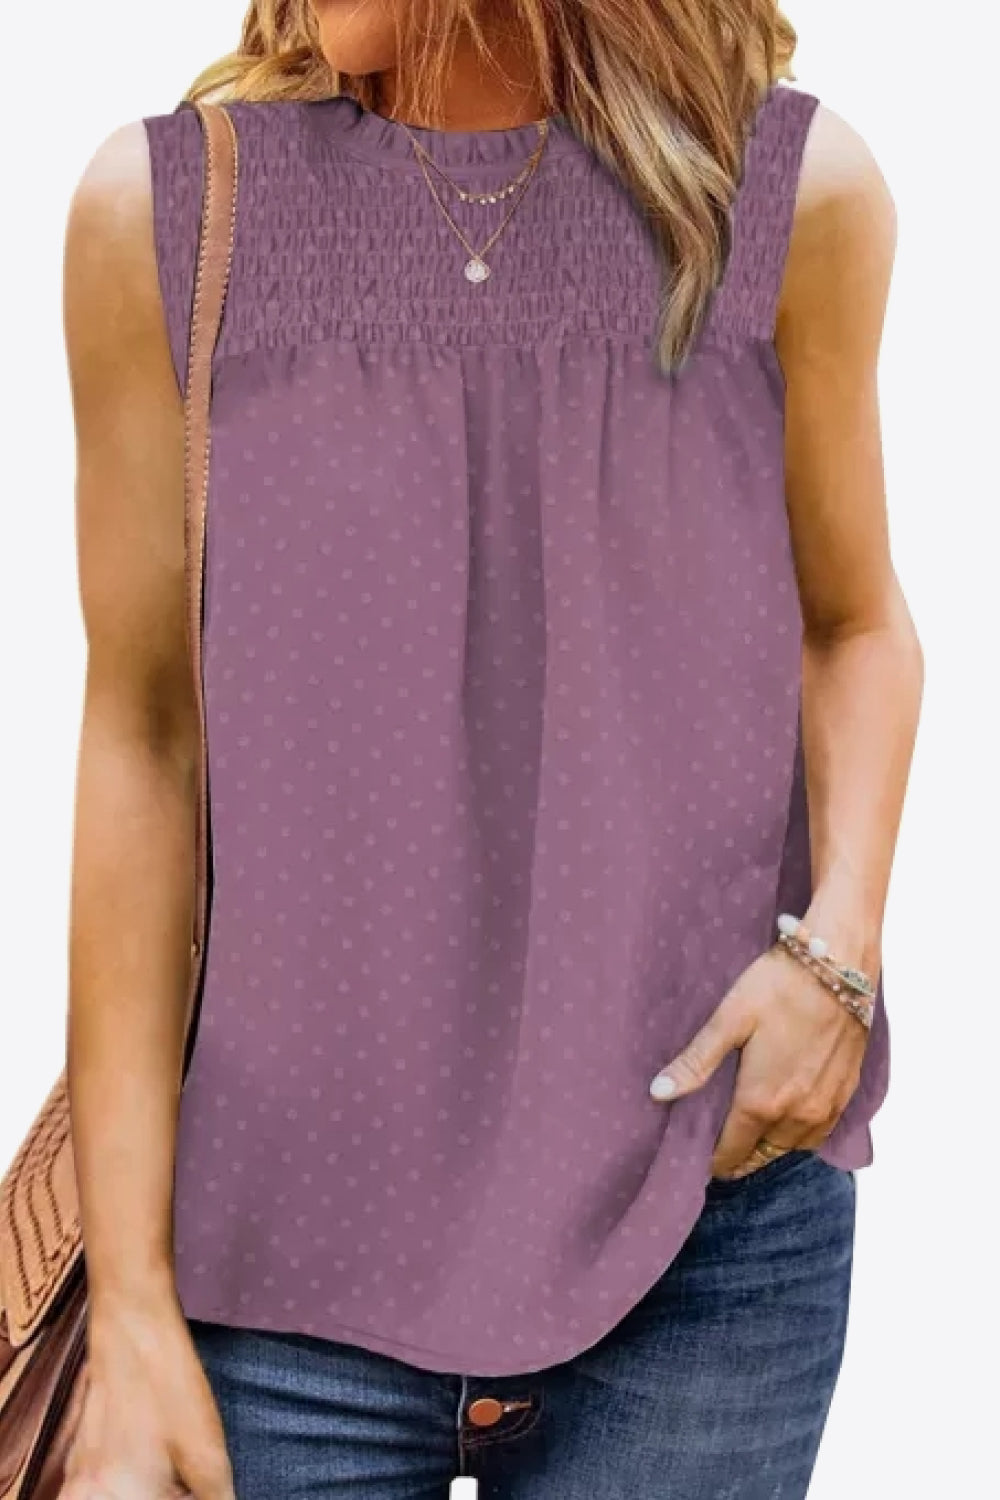 Smocked Tie Back Frill Trim Tank-SHIPS DIRECTLY TO YOU!